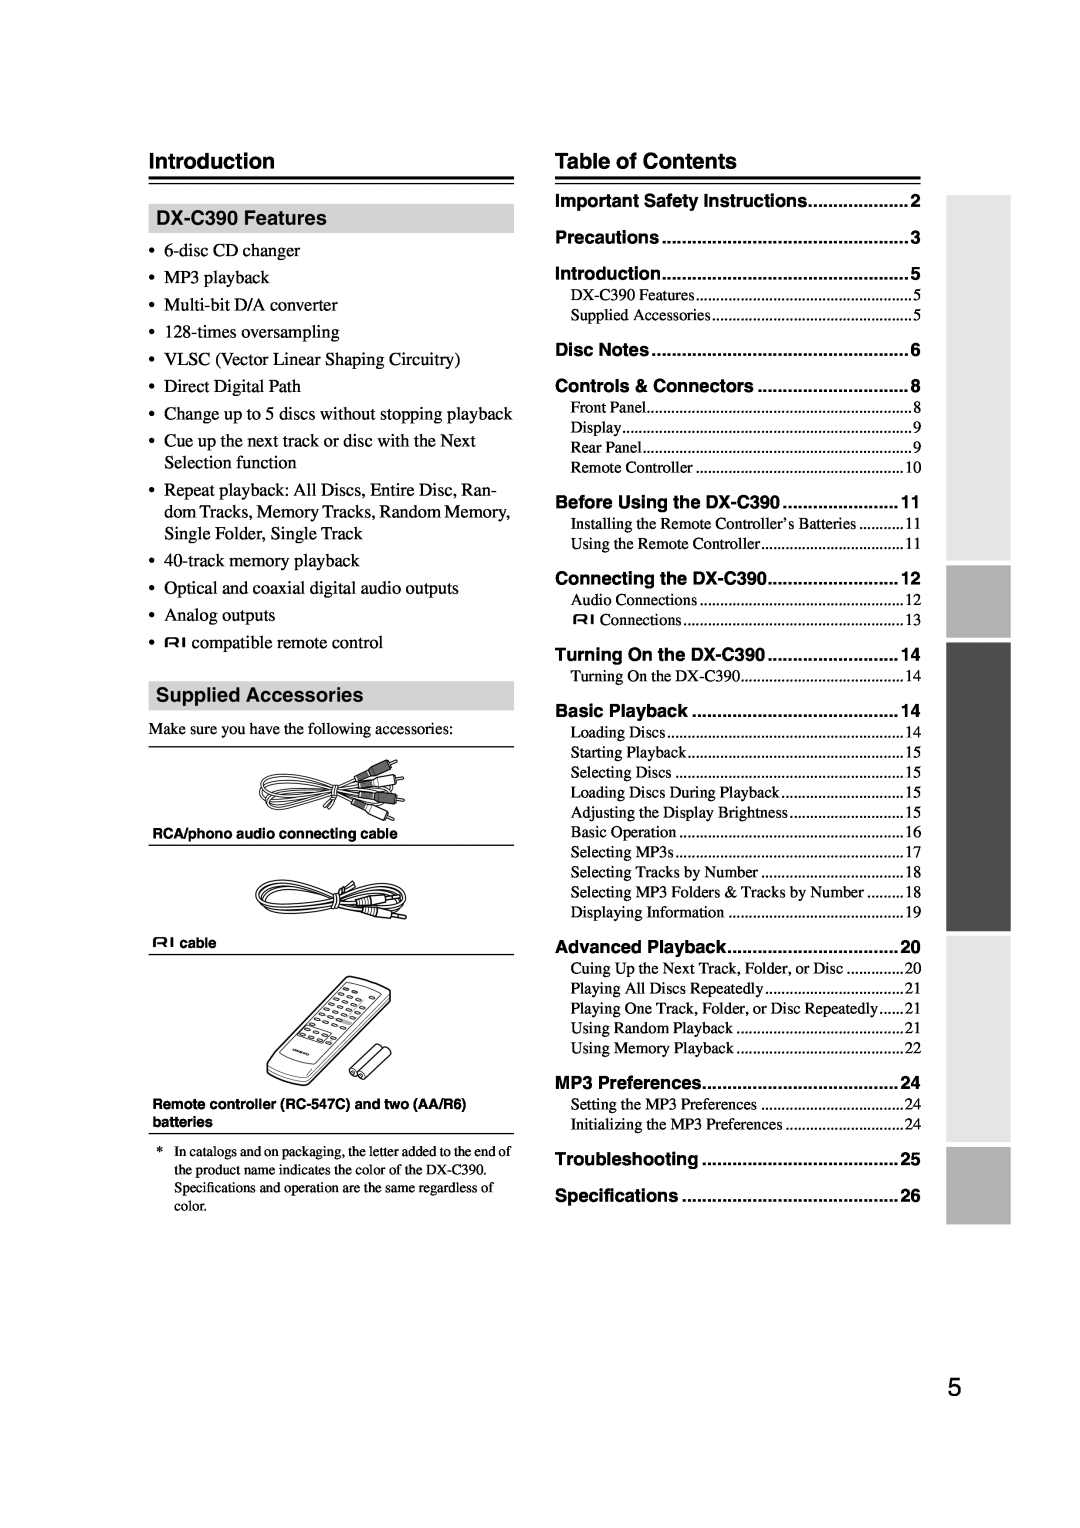 Onkyo instruction manual Introduction, Table of Contents, DX-C390Features, Supplied Accessories 